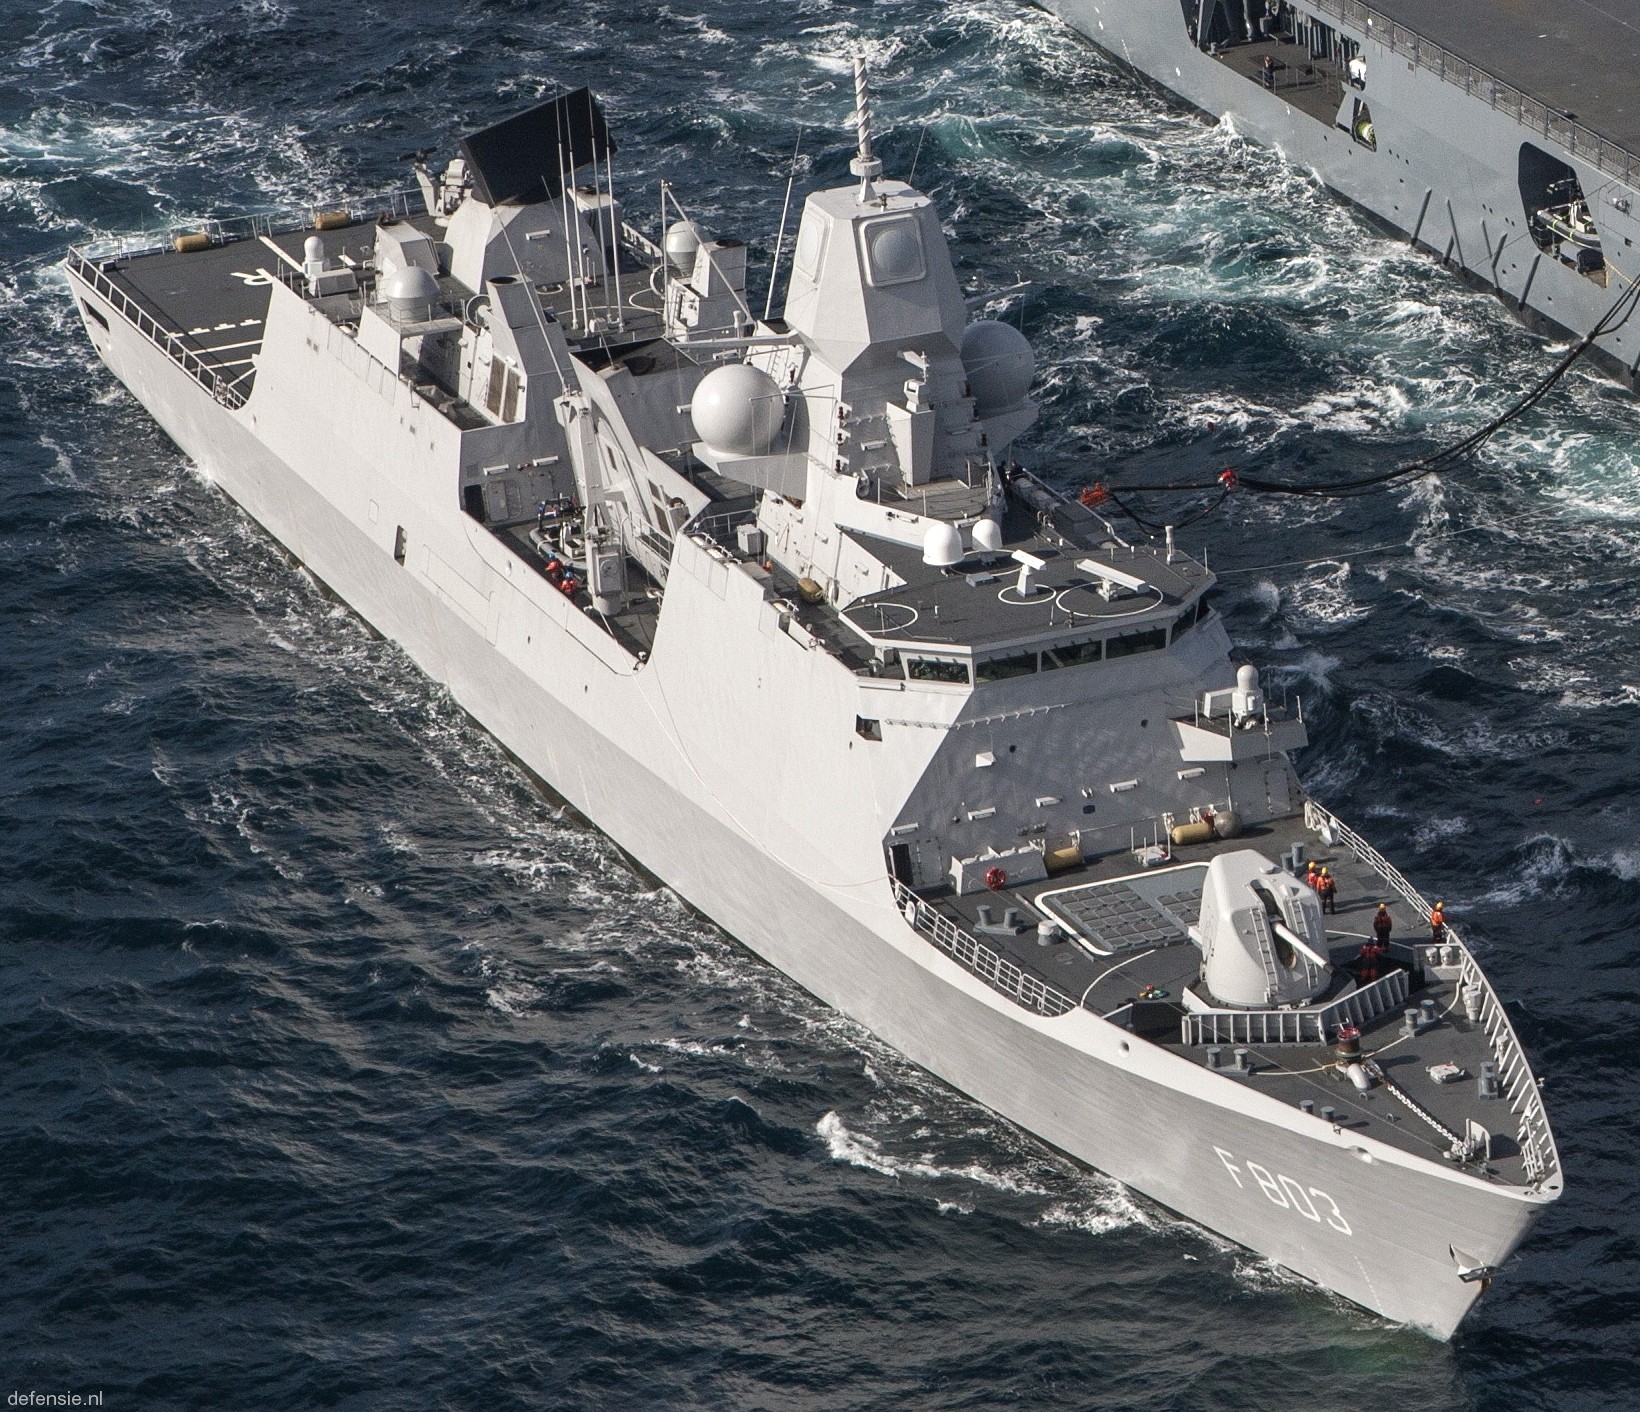 f-803 hnlms tromp guided missile frigate ffg air defense lcf royal netherlands navy 23